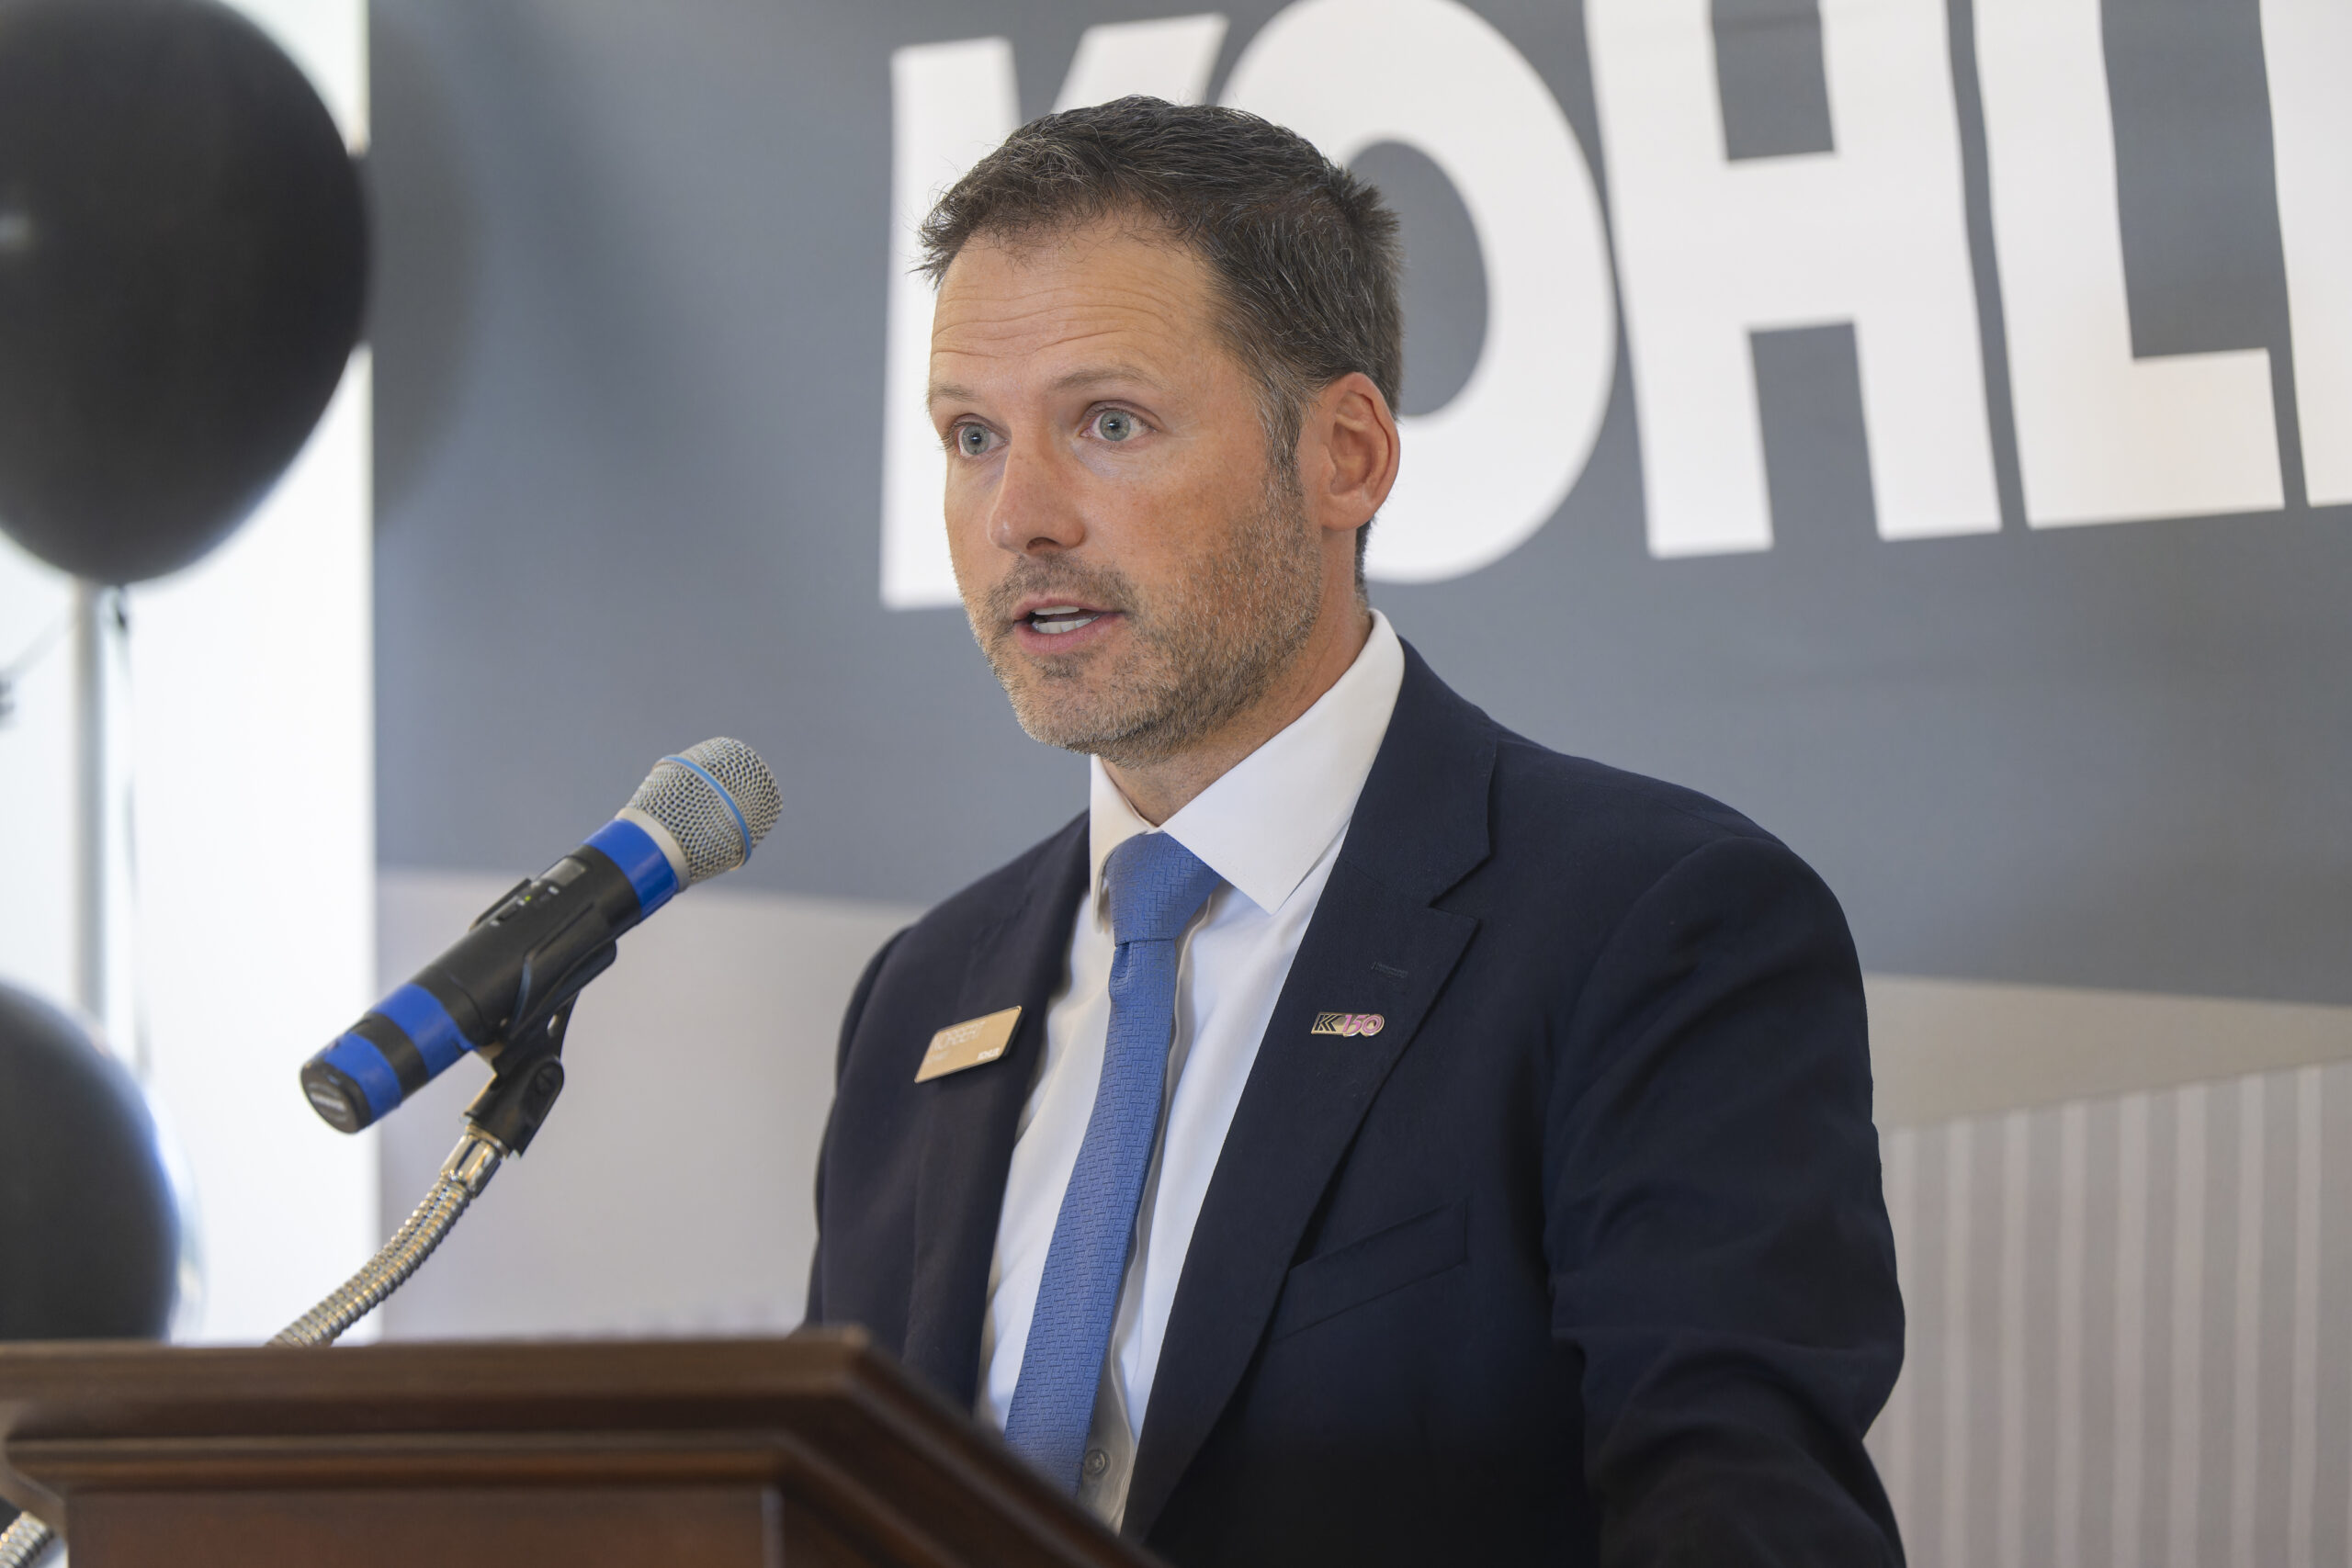 Kohler Senior Vice President of Kitchen & Bath Operations Norbert Schmidt speaks on the partnership between the company and the University of Illinois Research Park.